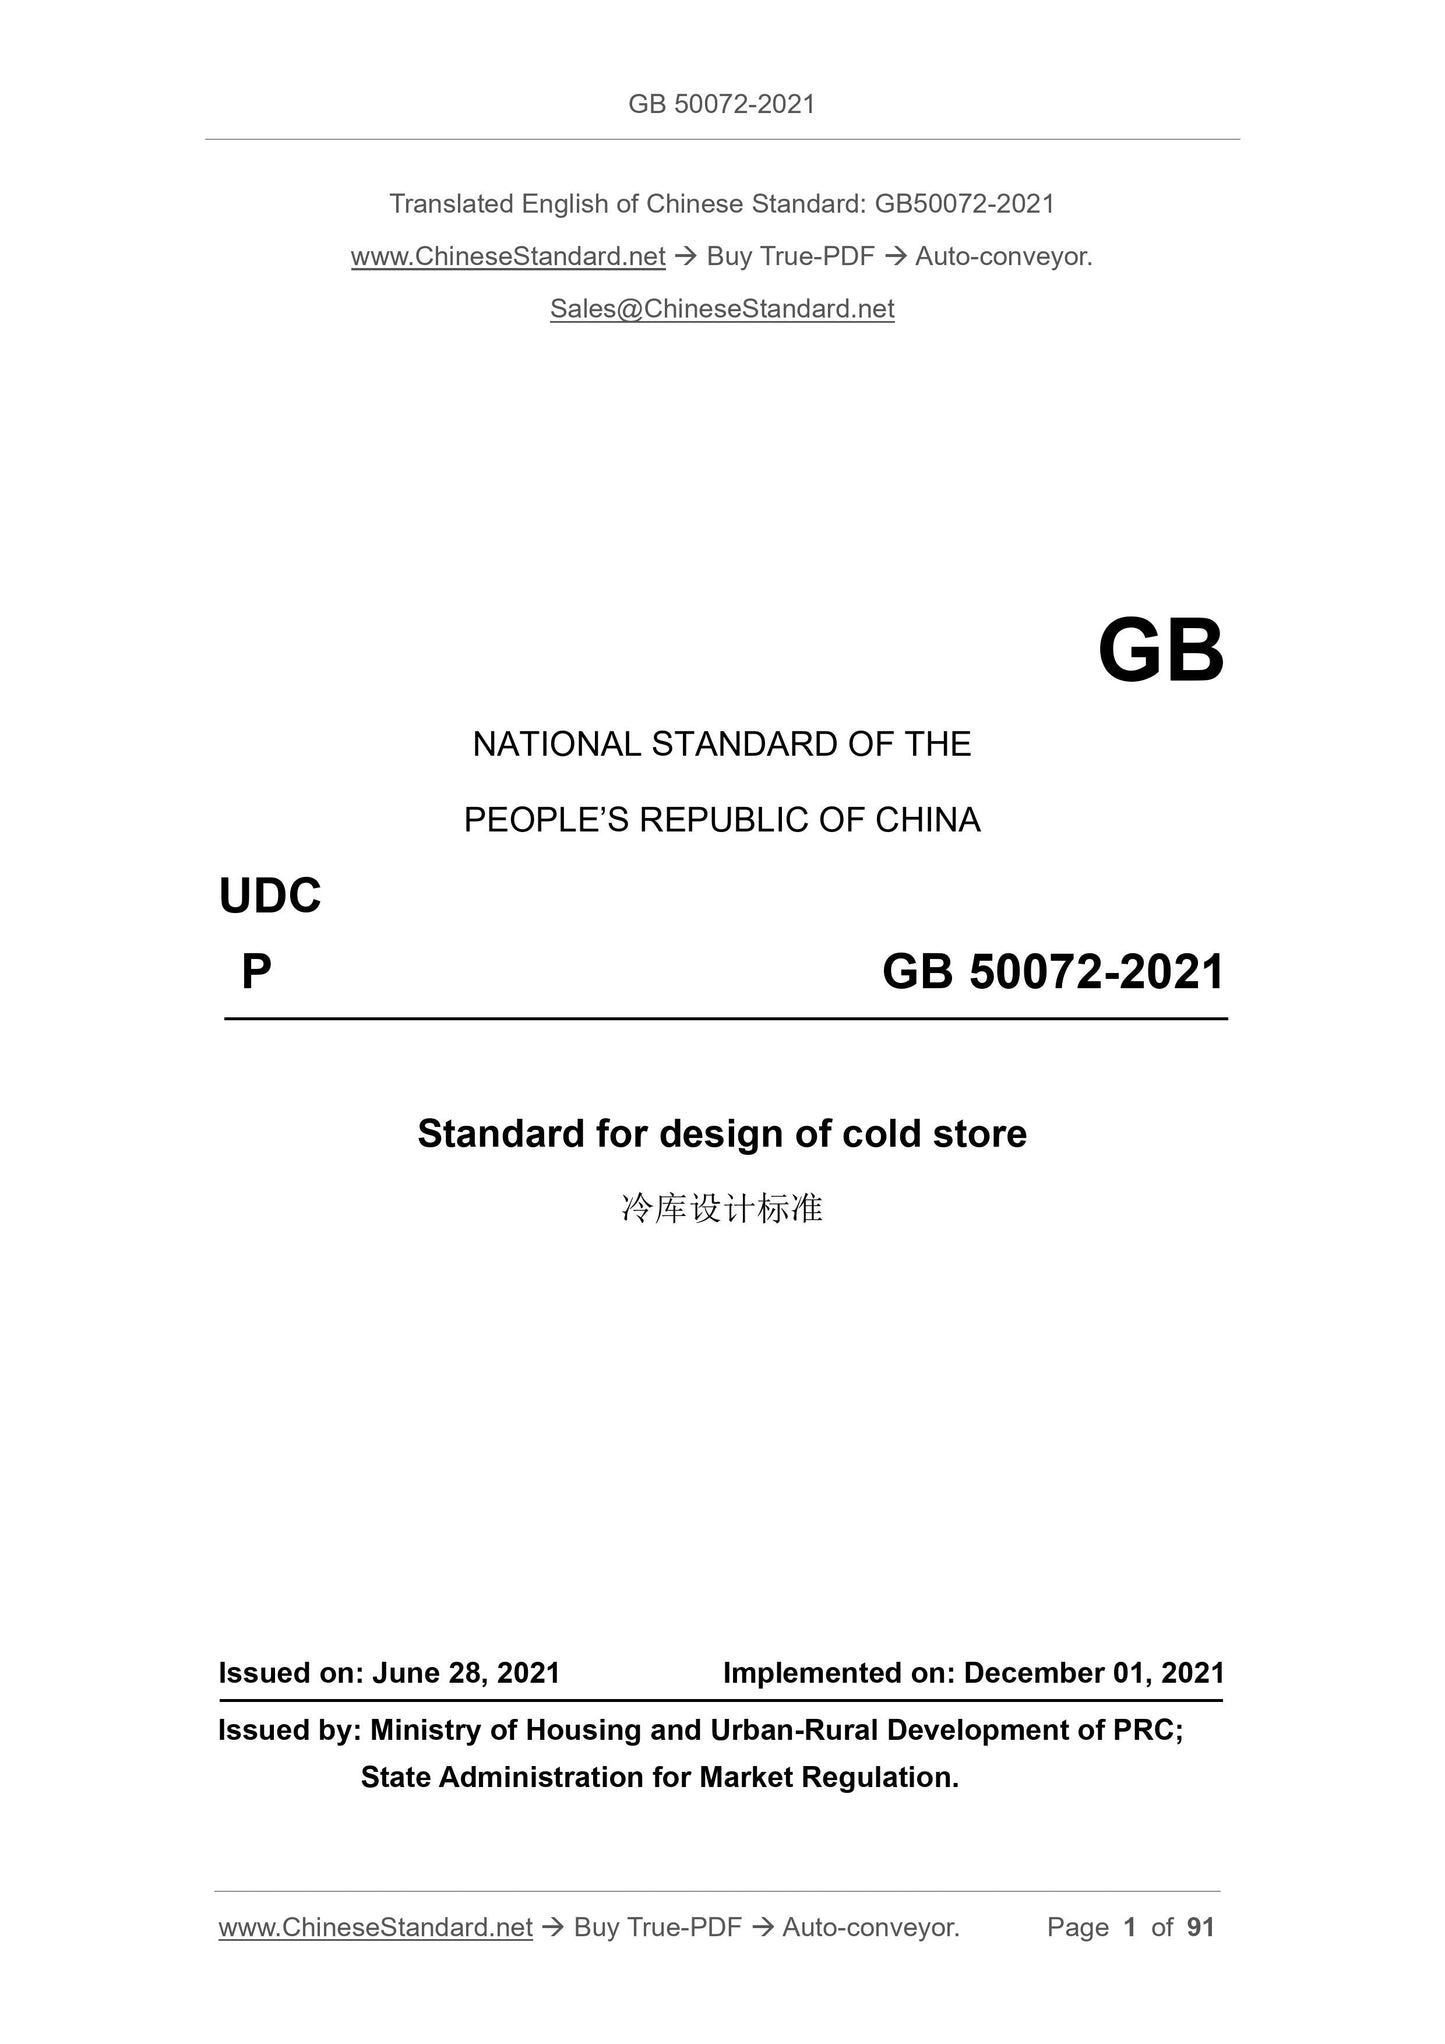 GB 50072-2021 Page 1